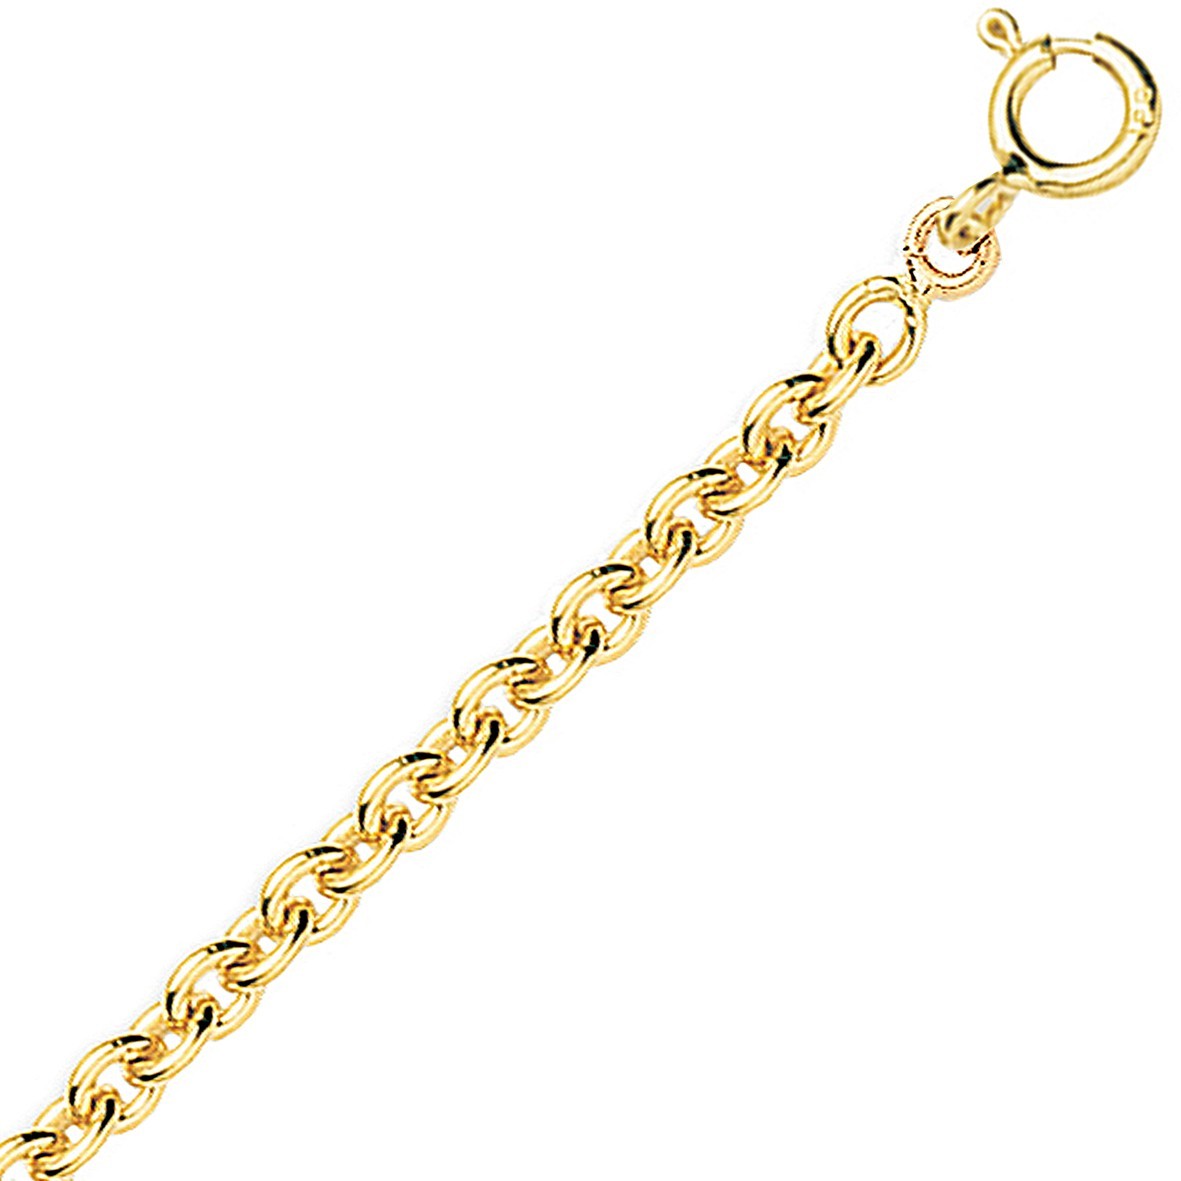 Chaine or jaune 18k maille forçat ronde 1,75mm